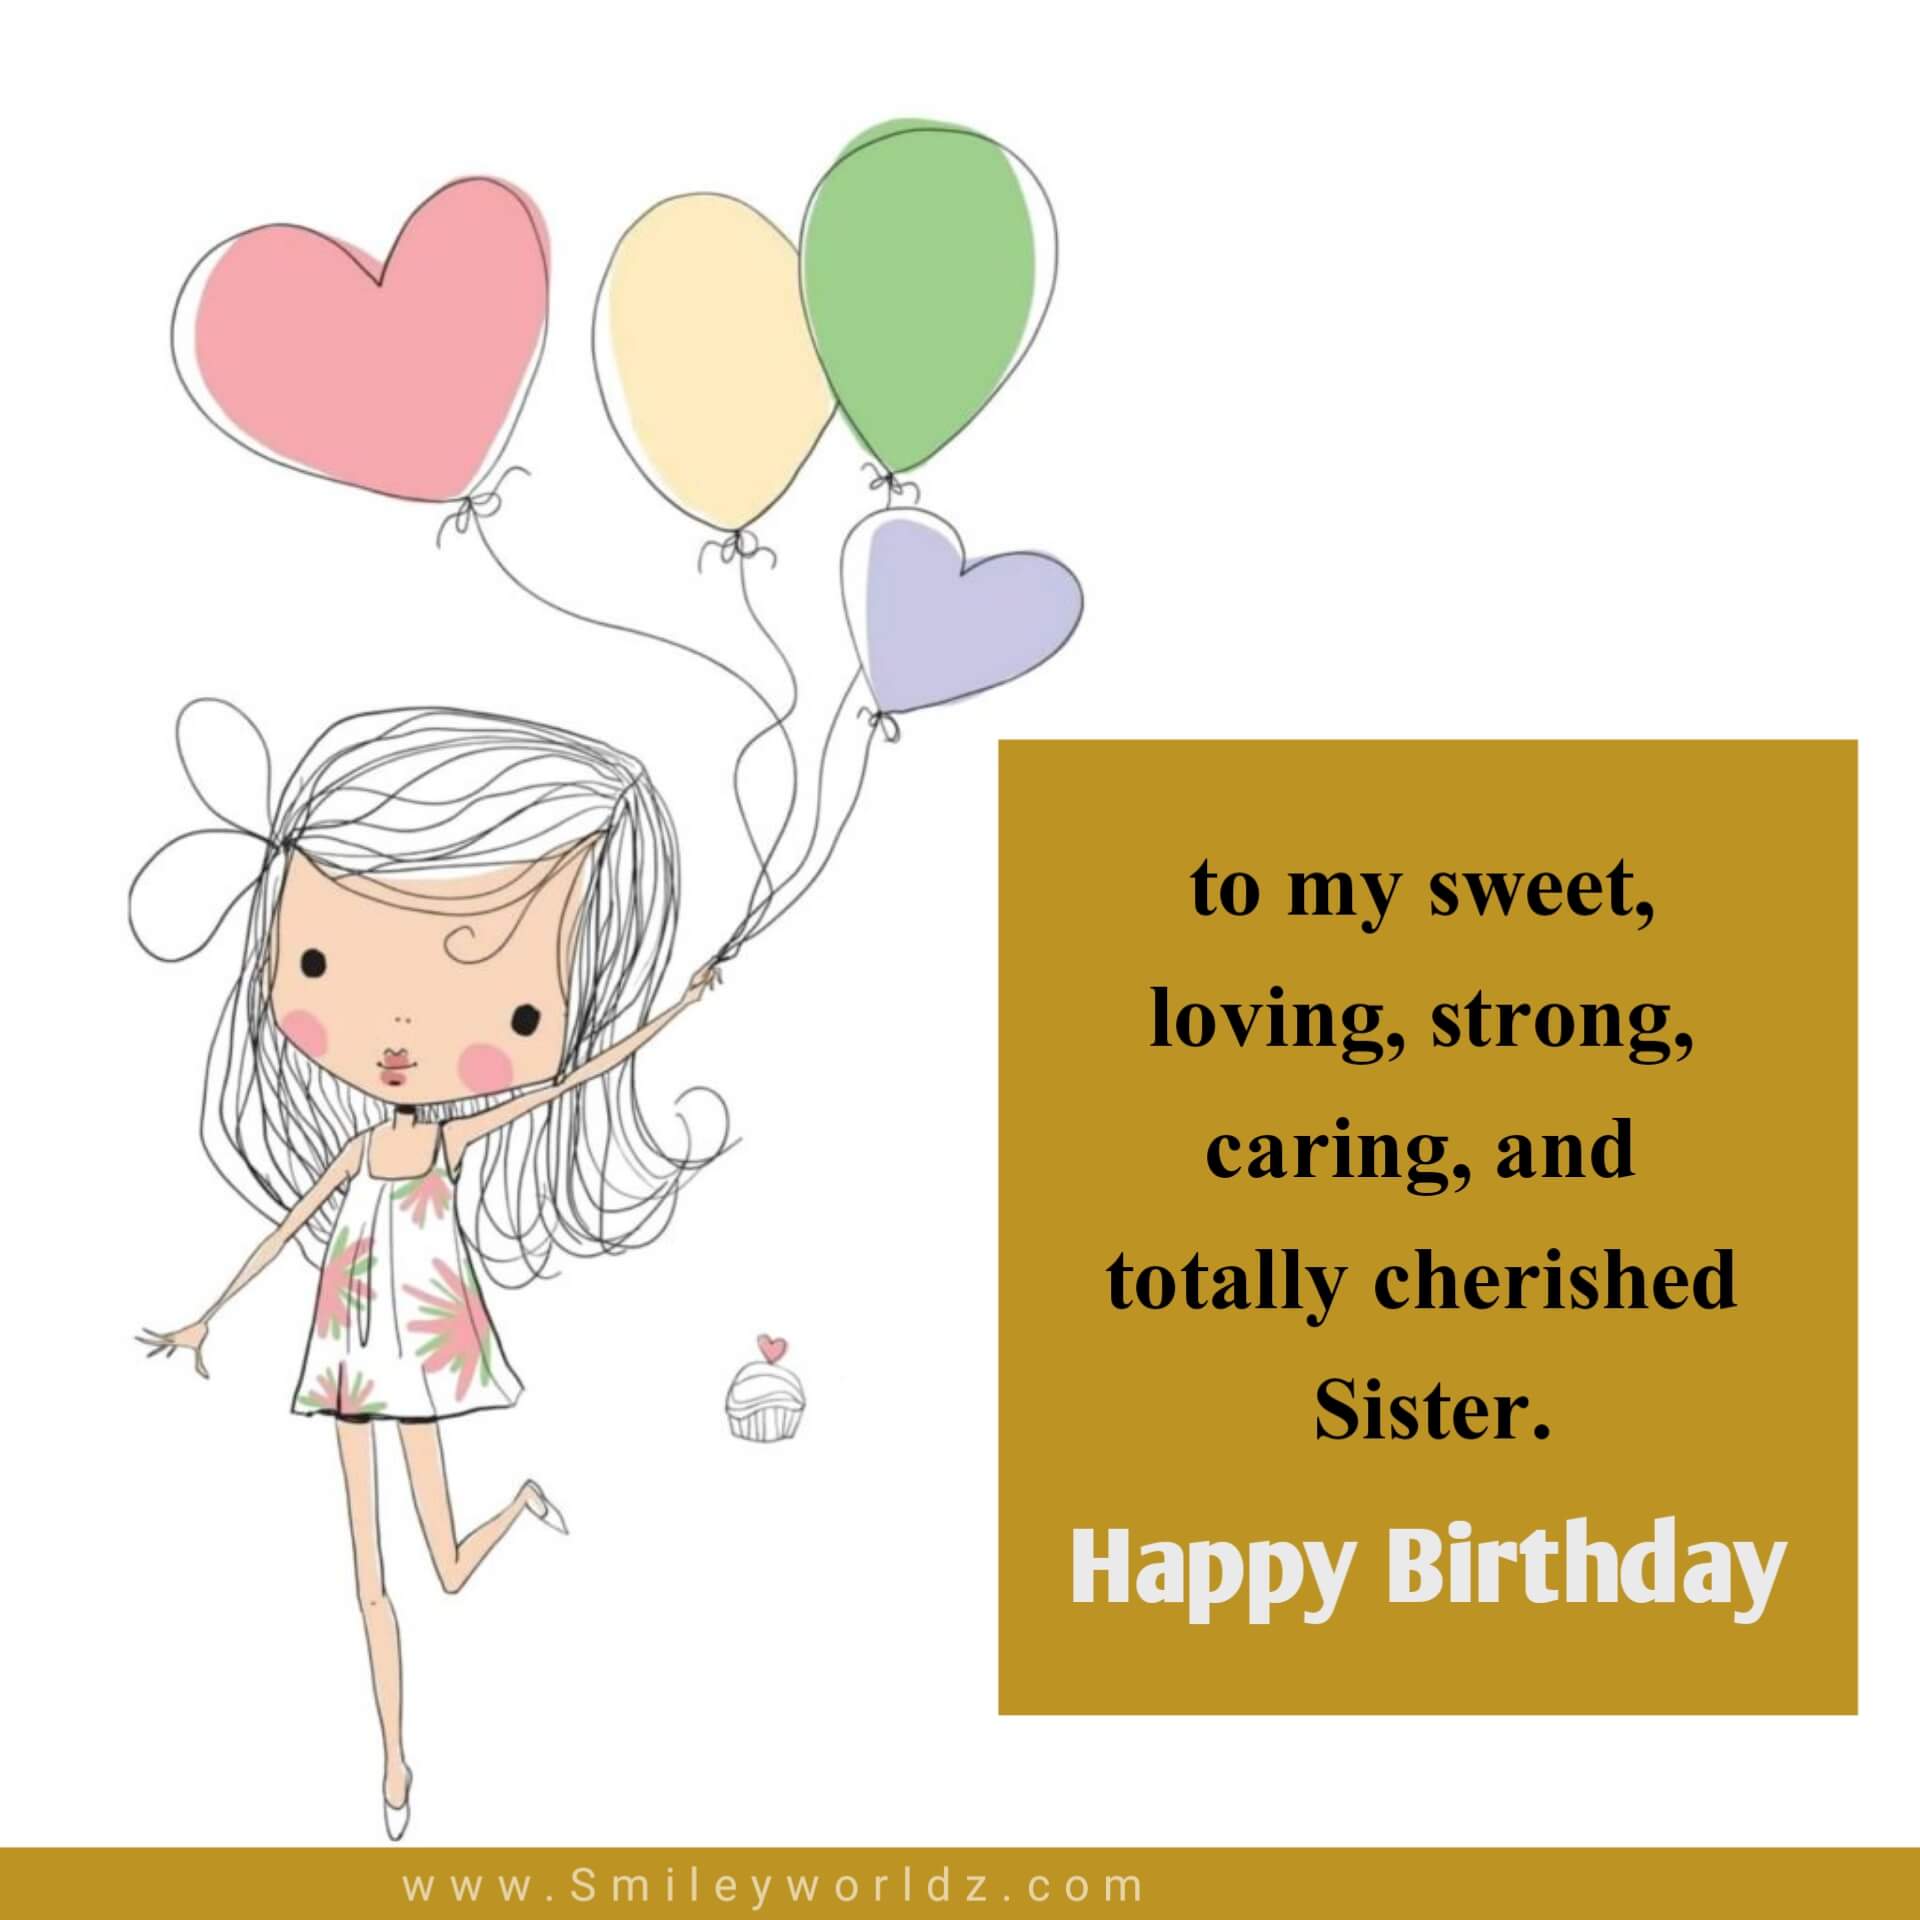 100+ Best Birthday Wishes for Sister and Messages